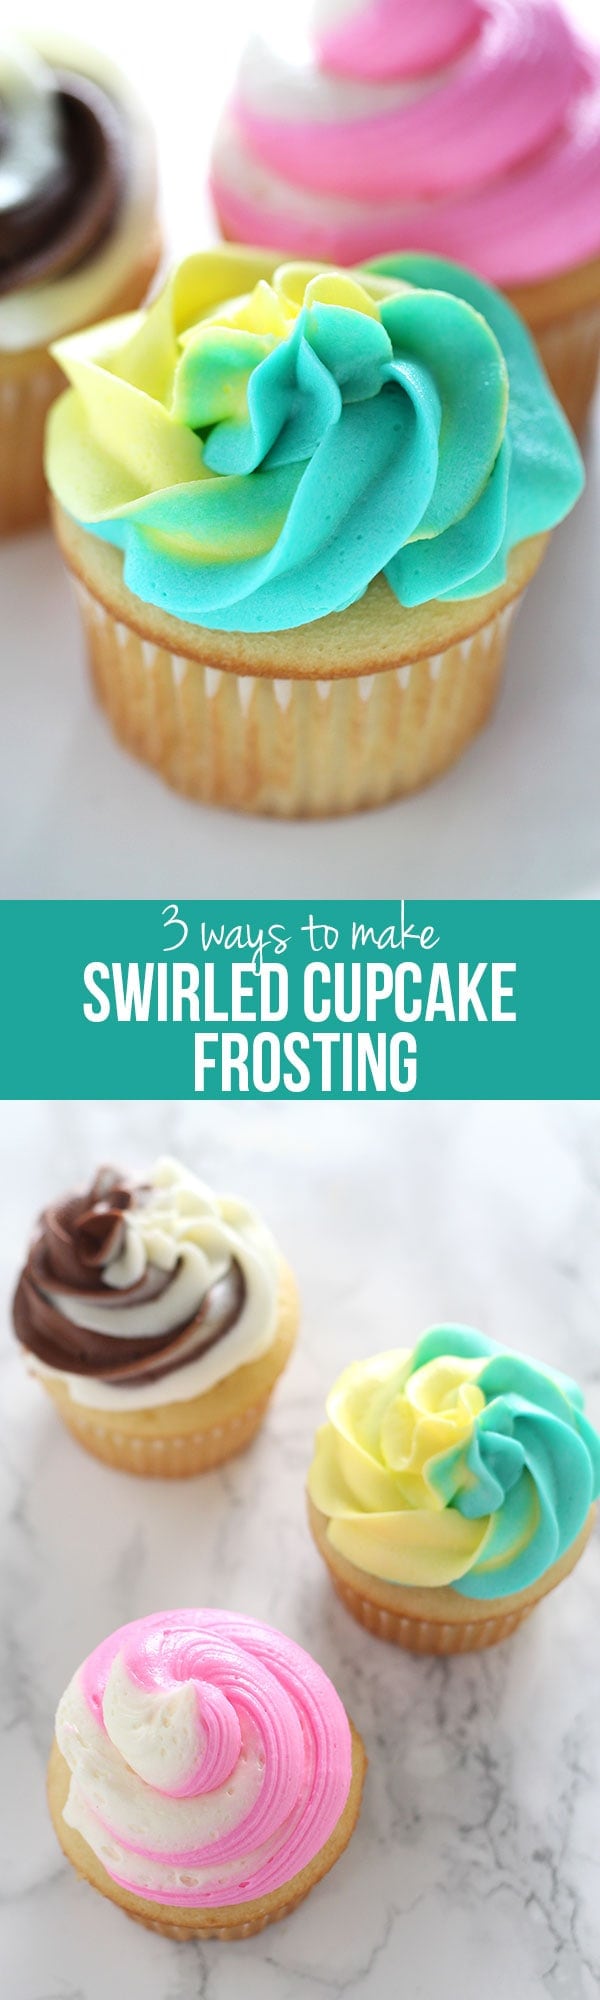 Learn my 3 ways to make two-toned (or even three!) swirled cupcake frosting. The second method doesn't even require a piping bag OR decorative piping tip. Click for my full step-by-step video, product recommendations, and more!